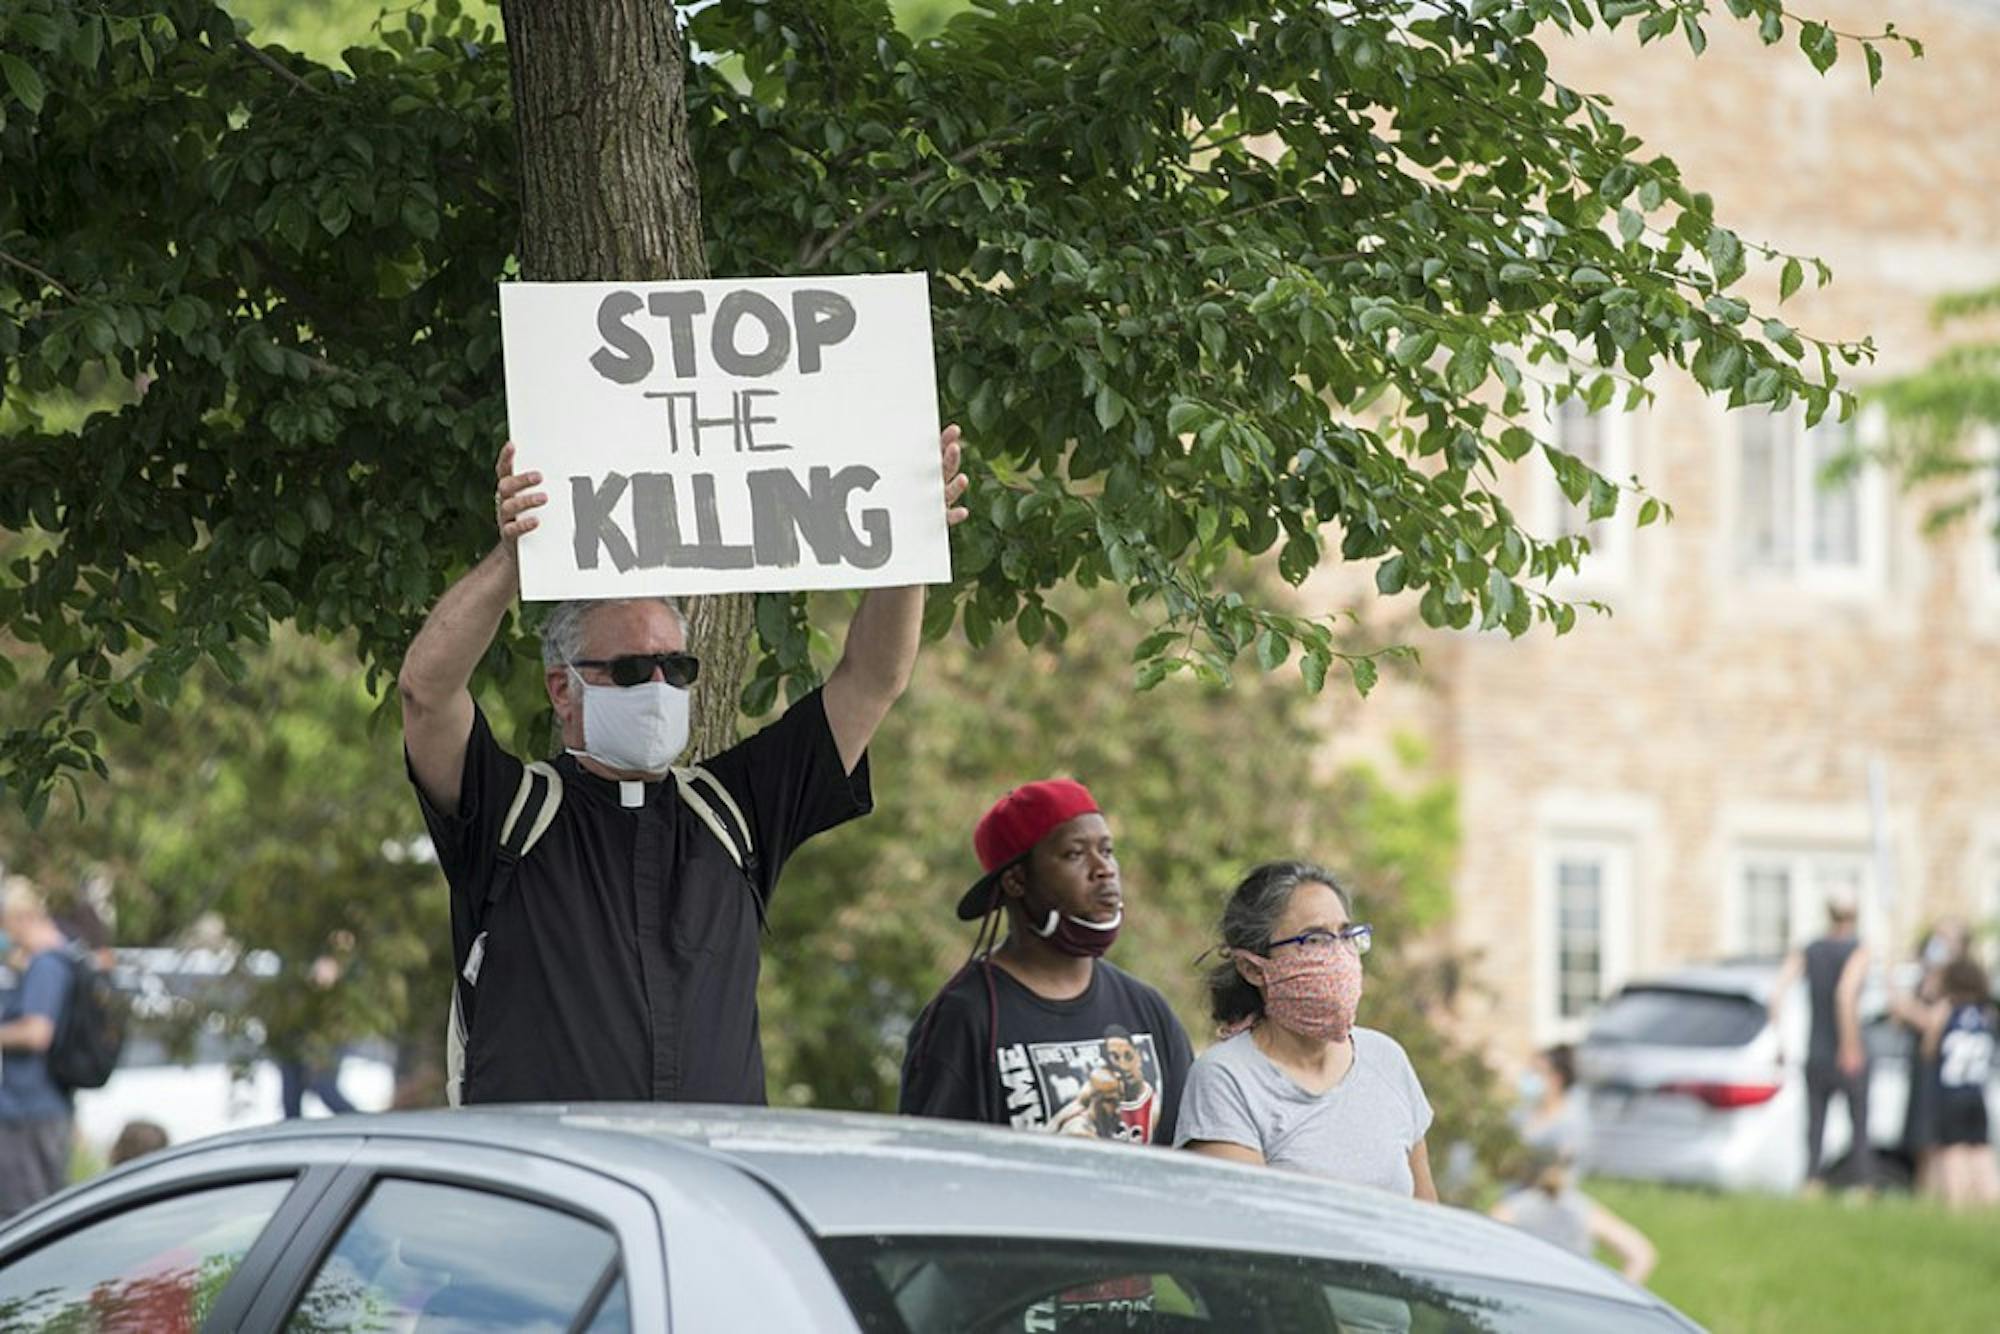 1080px-Protest_against_police_violence_-_Justice_for_George_Floyd_May_26_2020_21